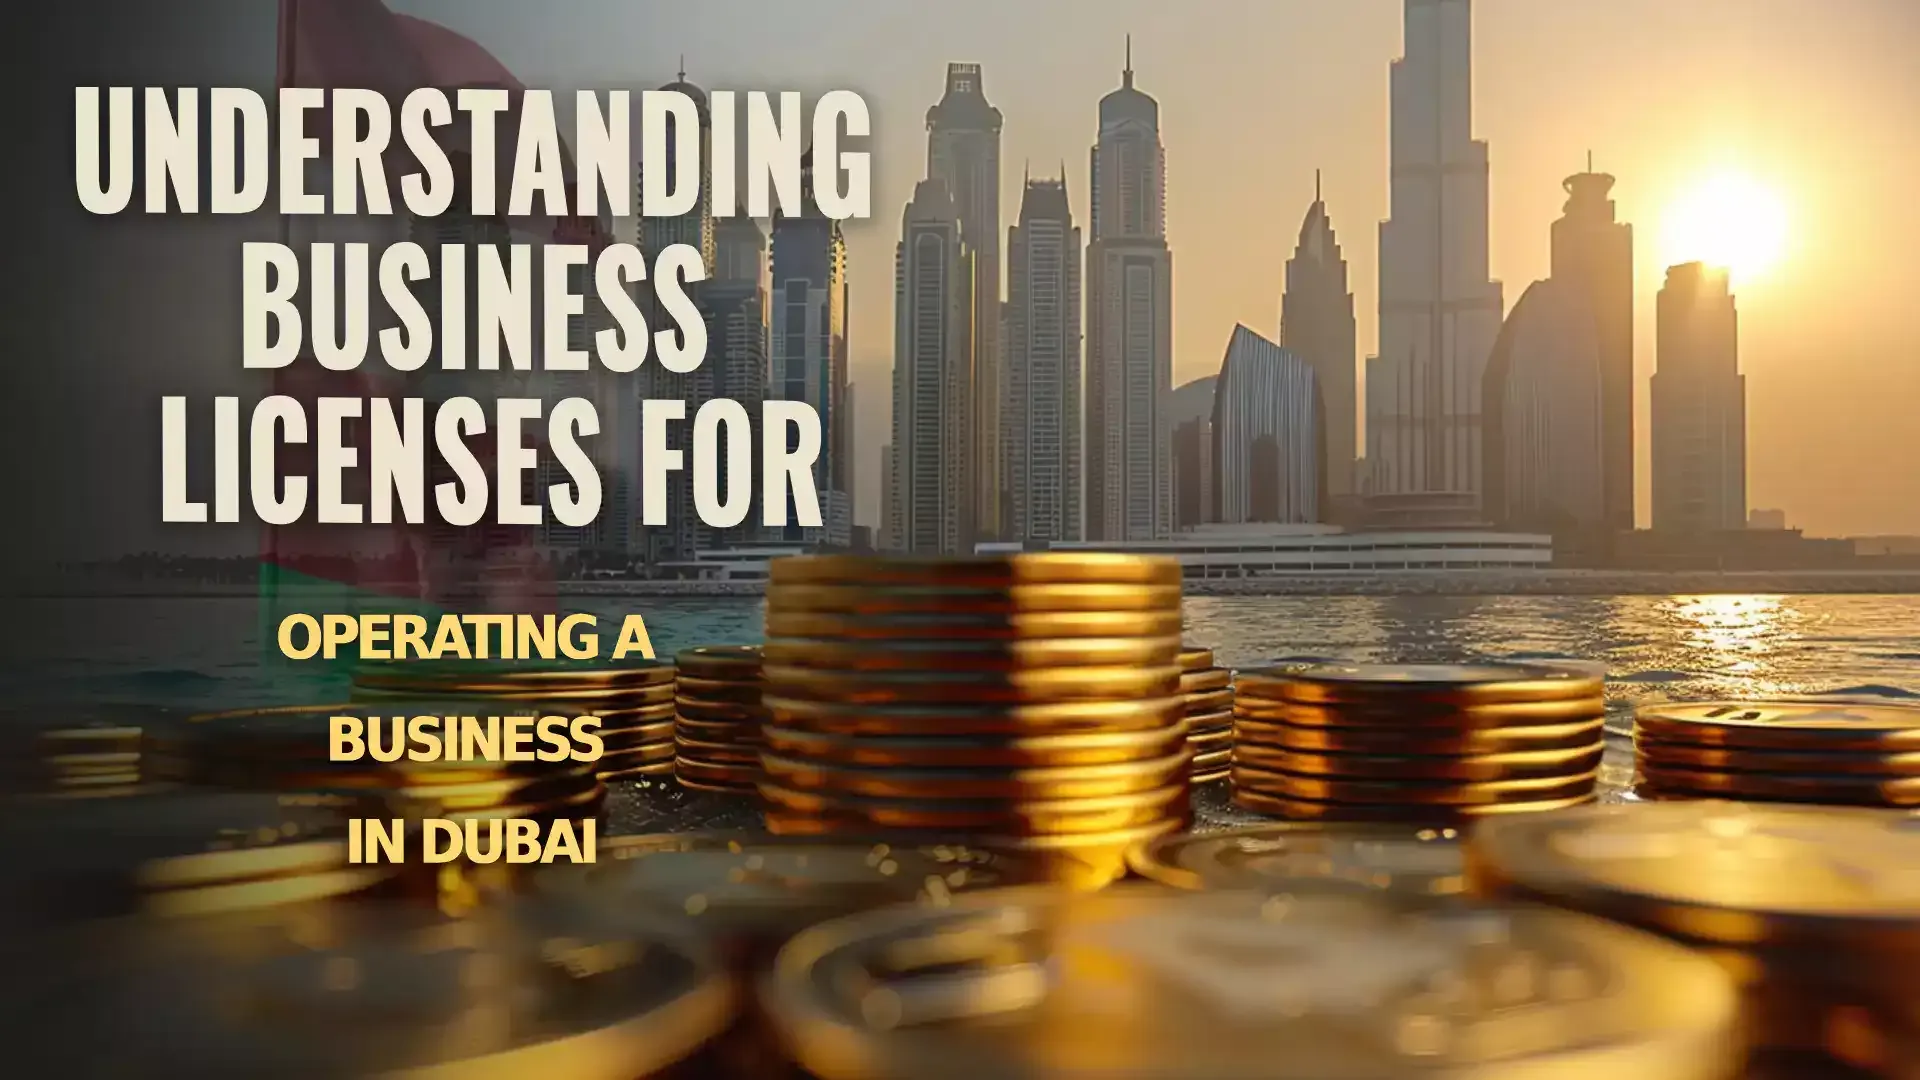 Image showing bustling business activity in Dubai, a hub of economic growth